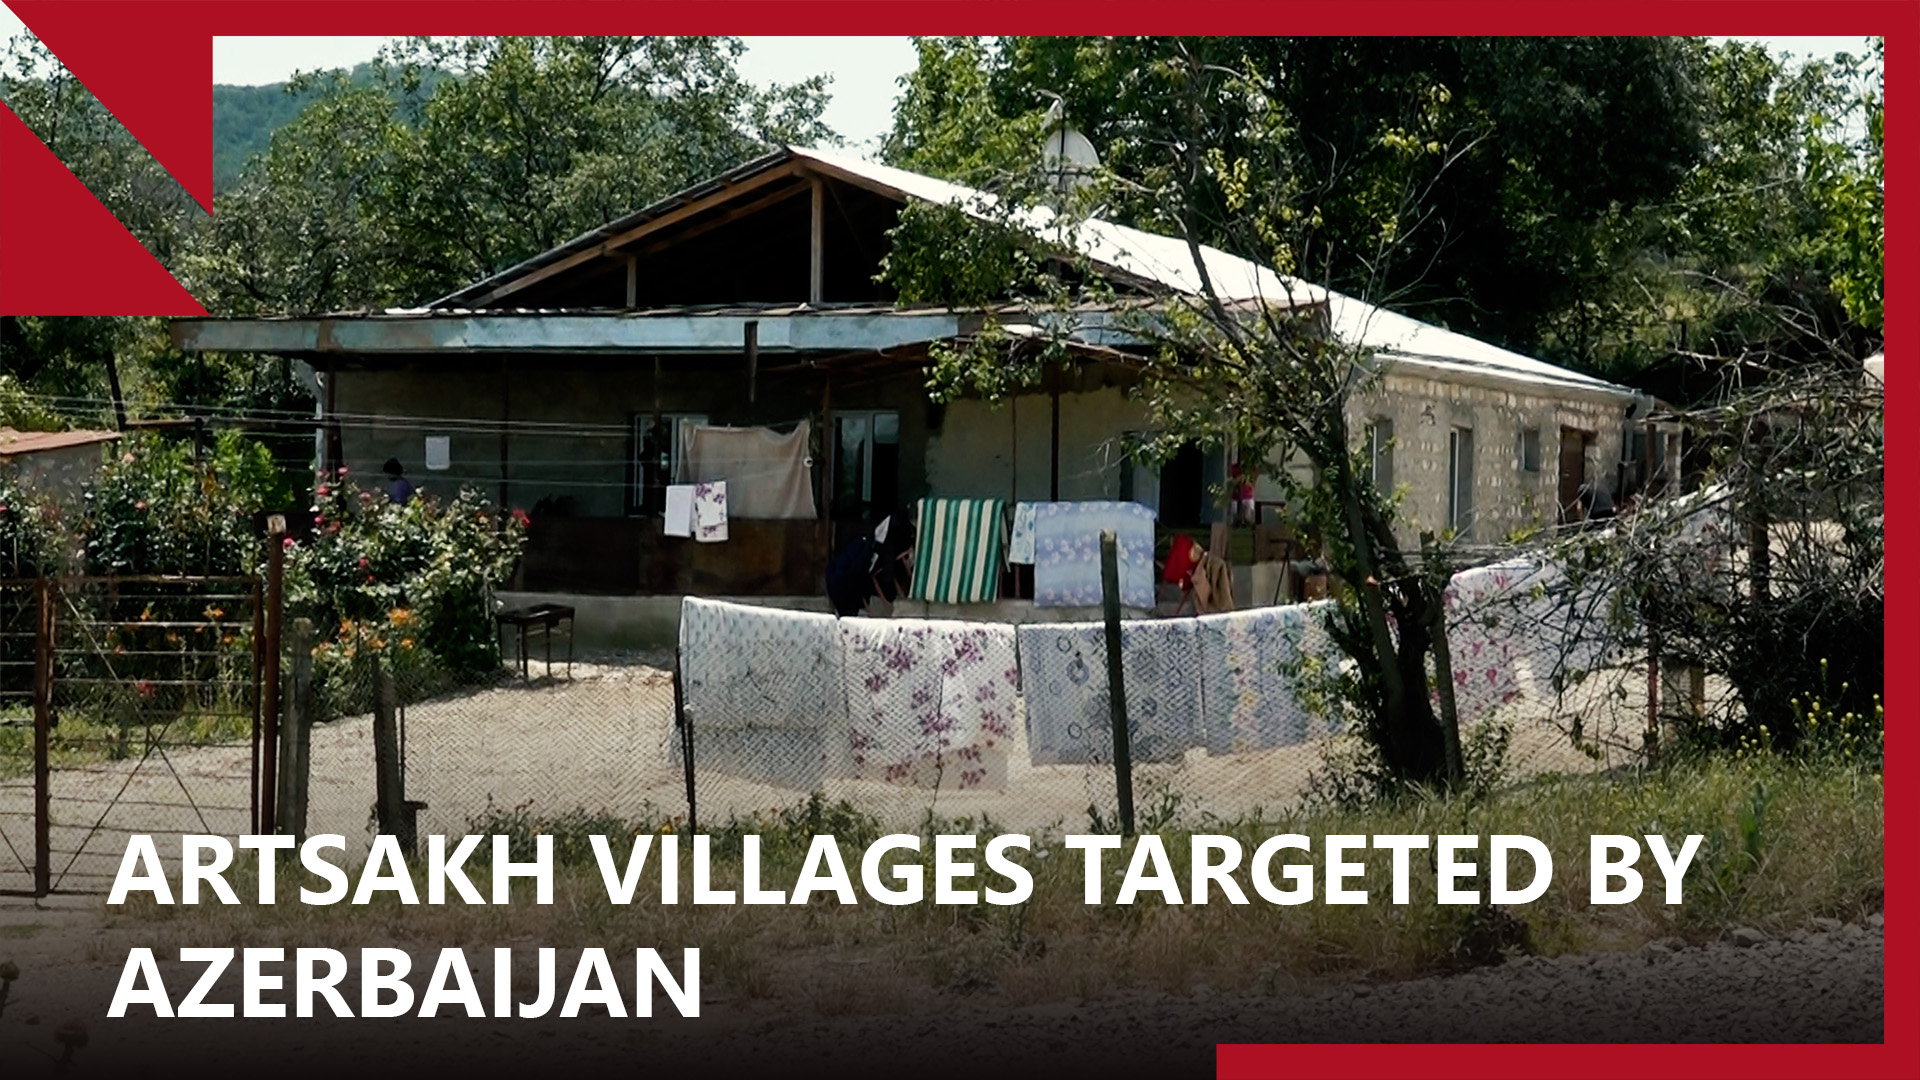 Artsakh Villages Under Fire: What Do Residents Say?